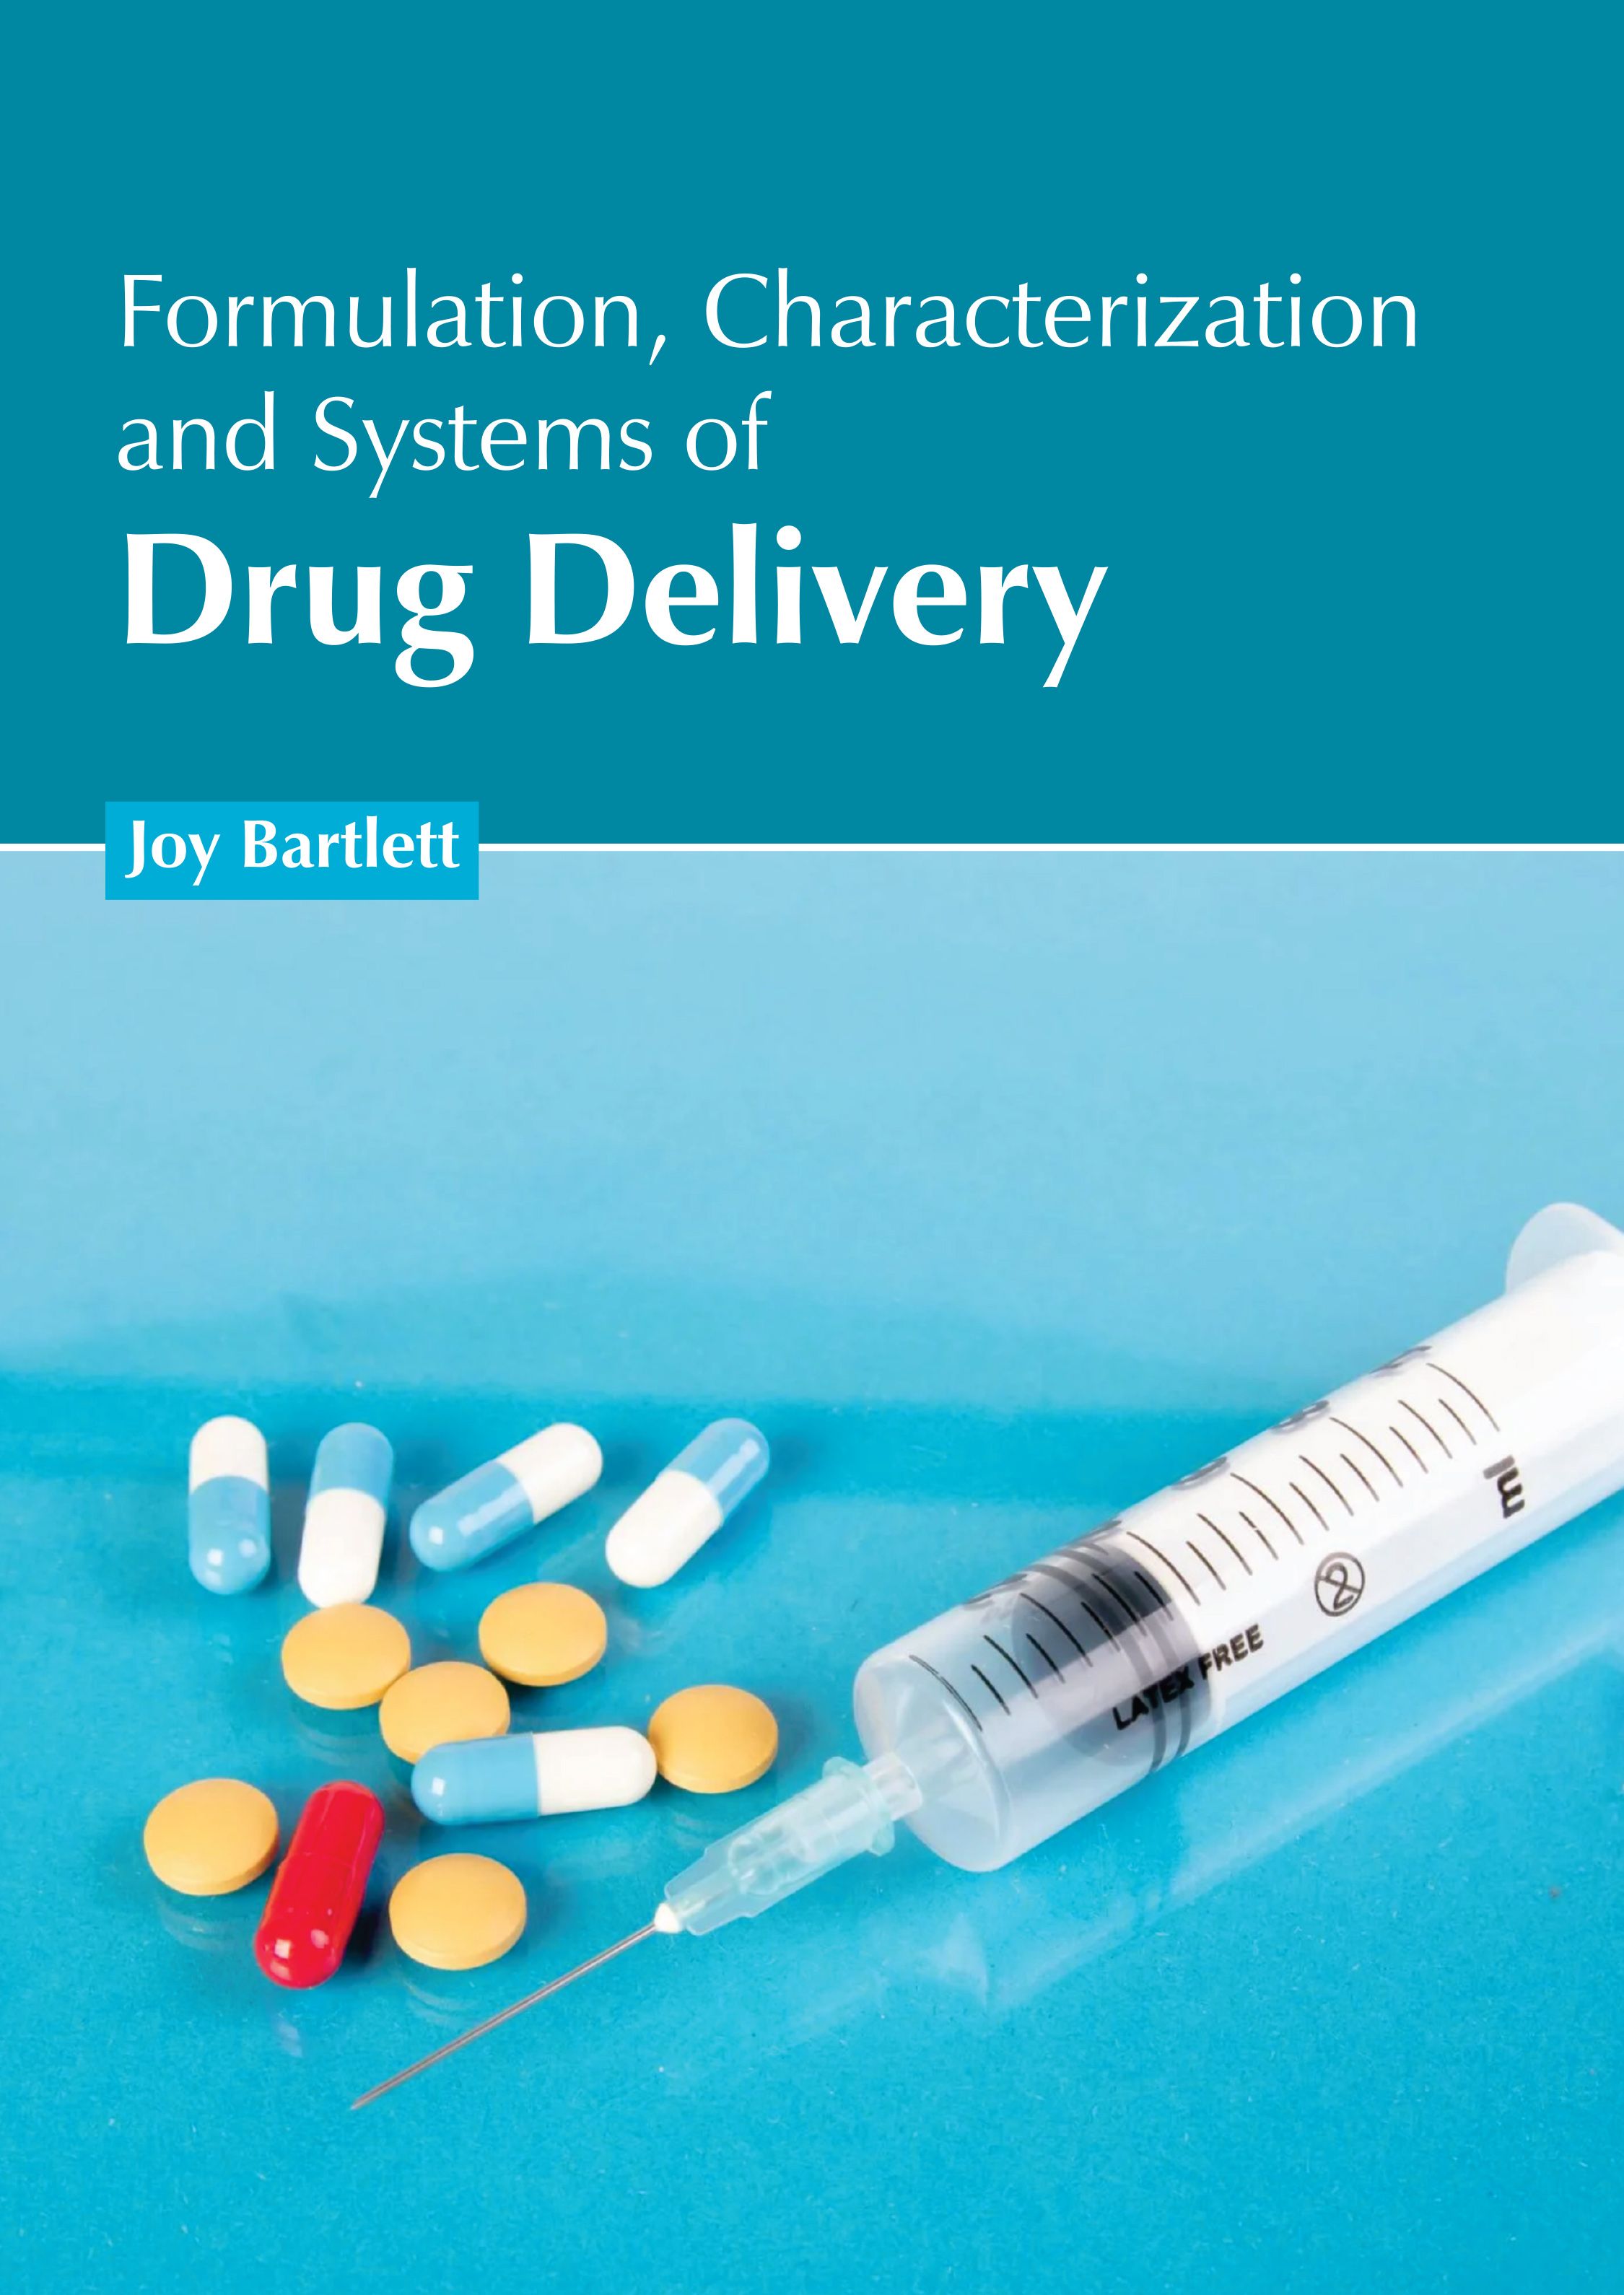 

exclusive-publishers/american-medical-publishers/formulation-characterization-and-systems-of-drug-delivery-9798887400723